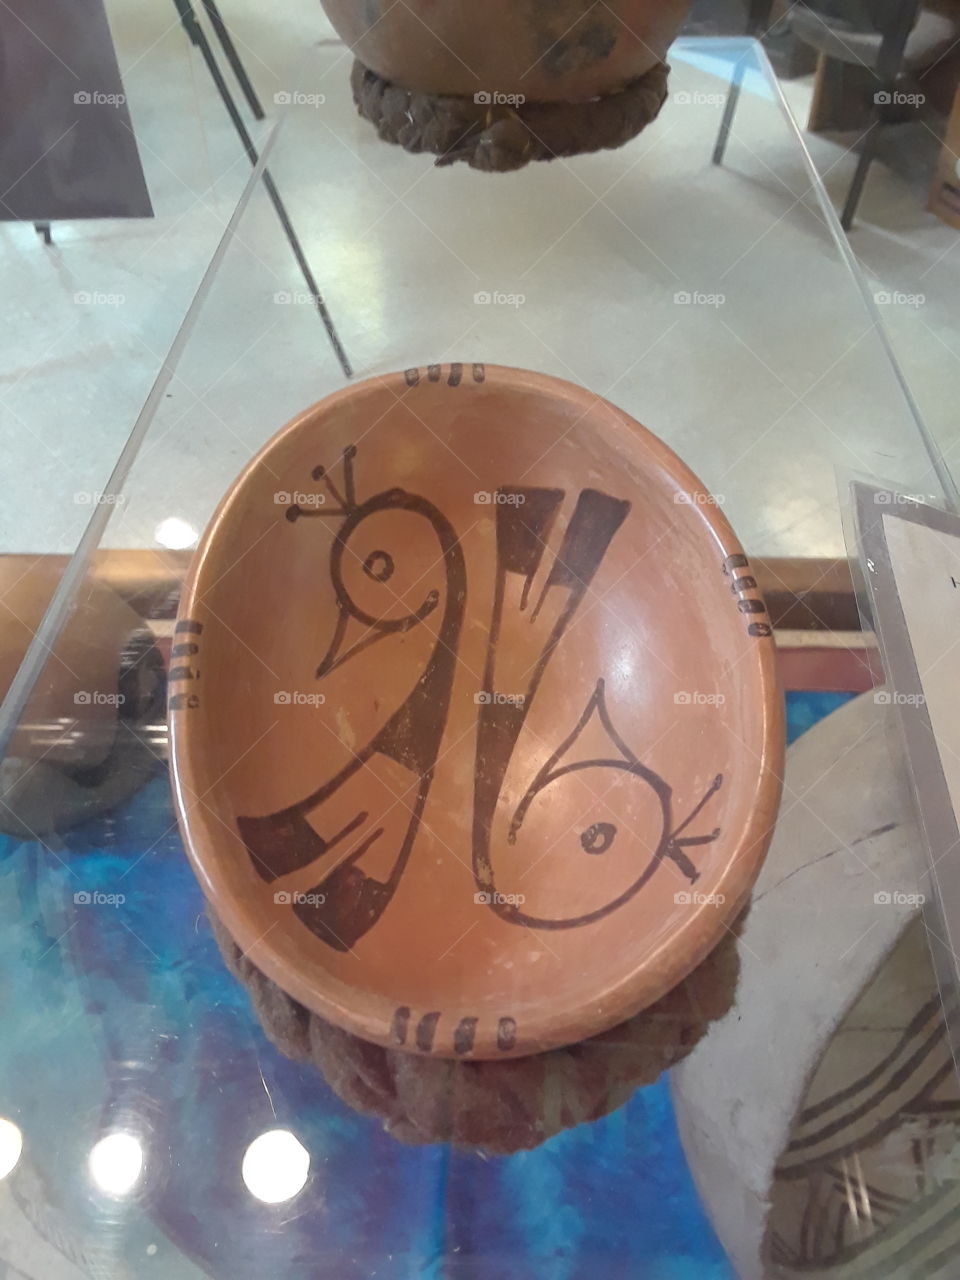 Pottery, New Mexico is history